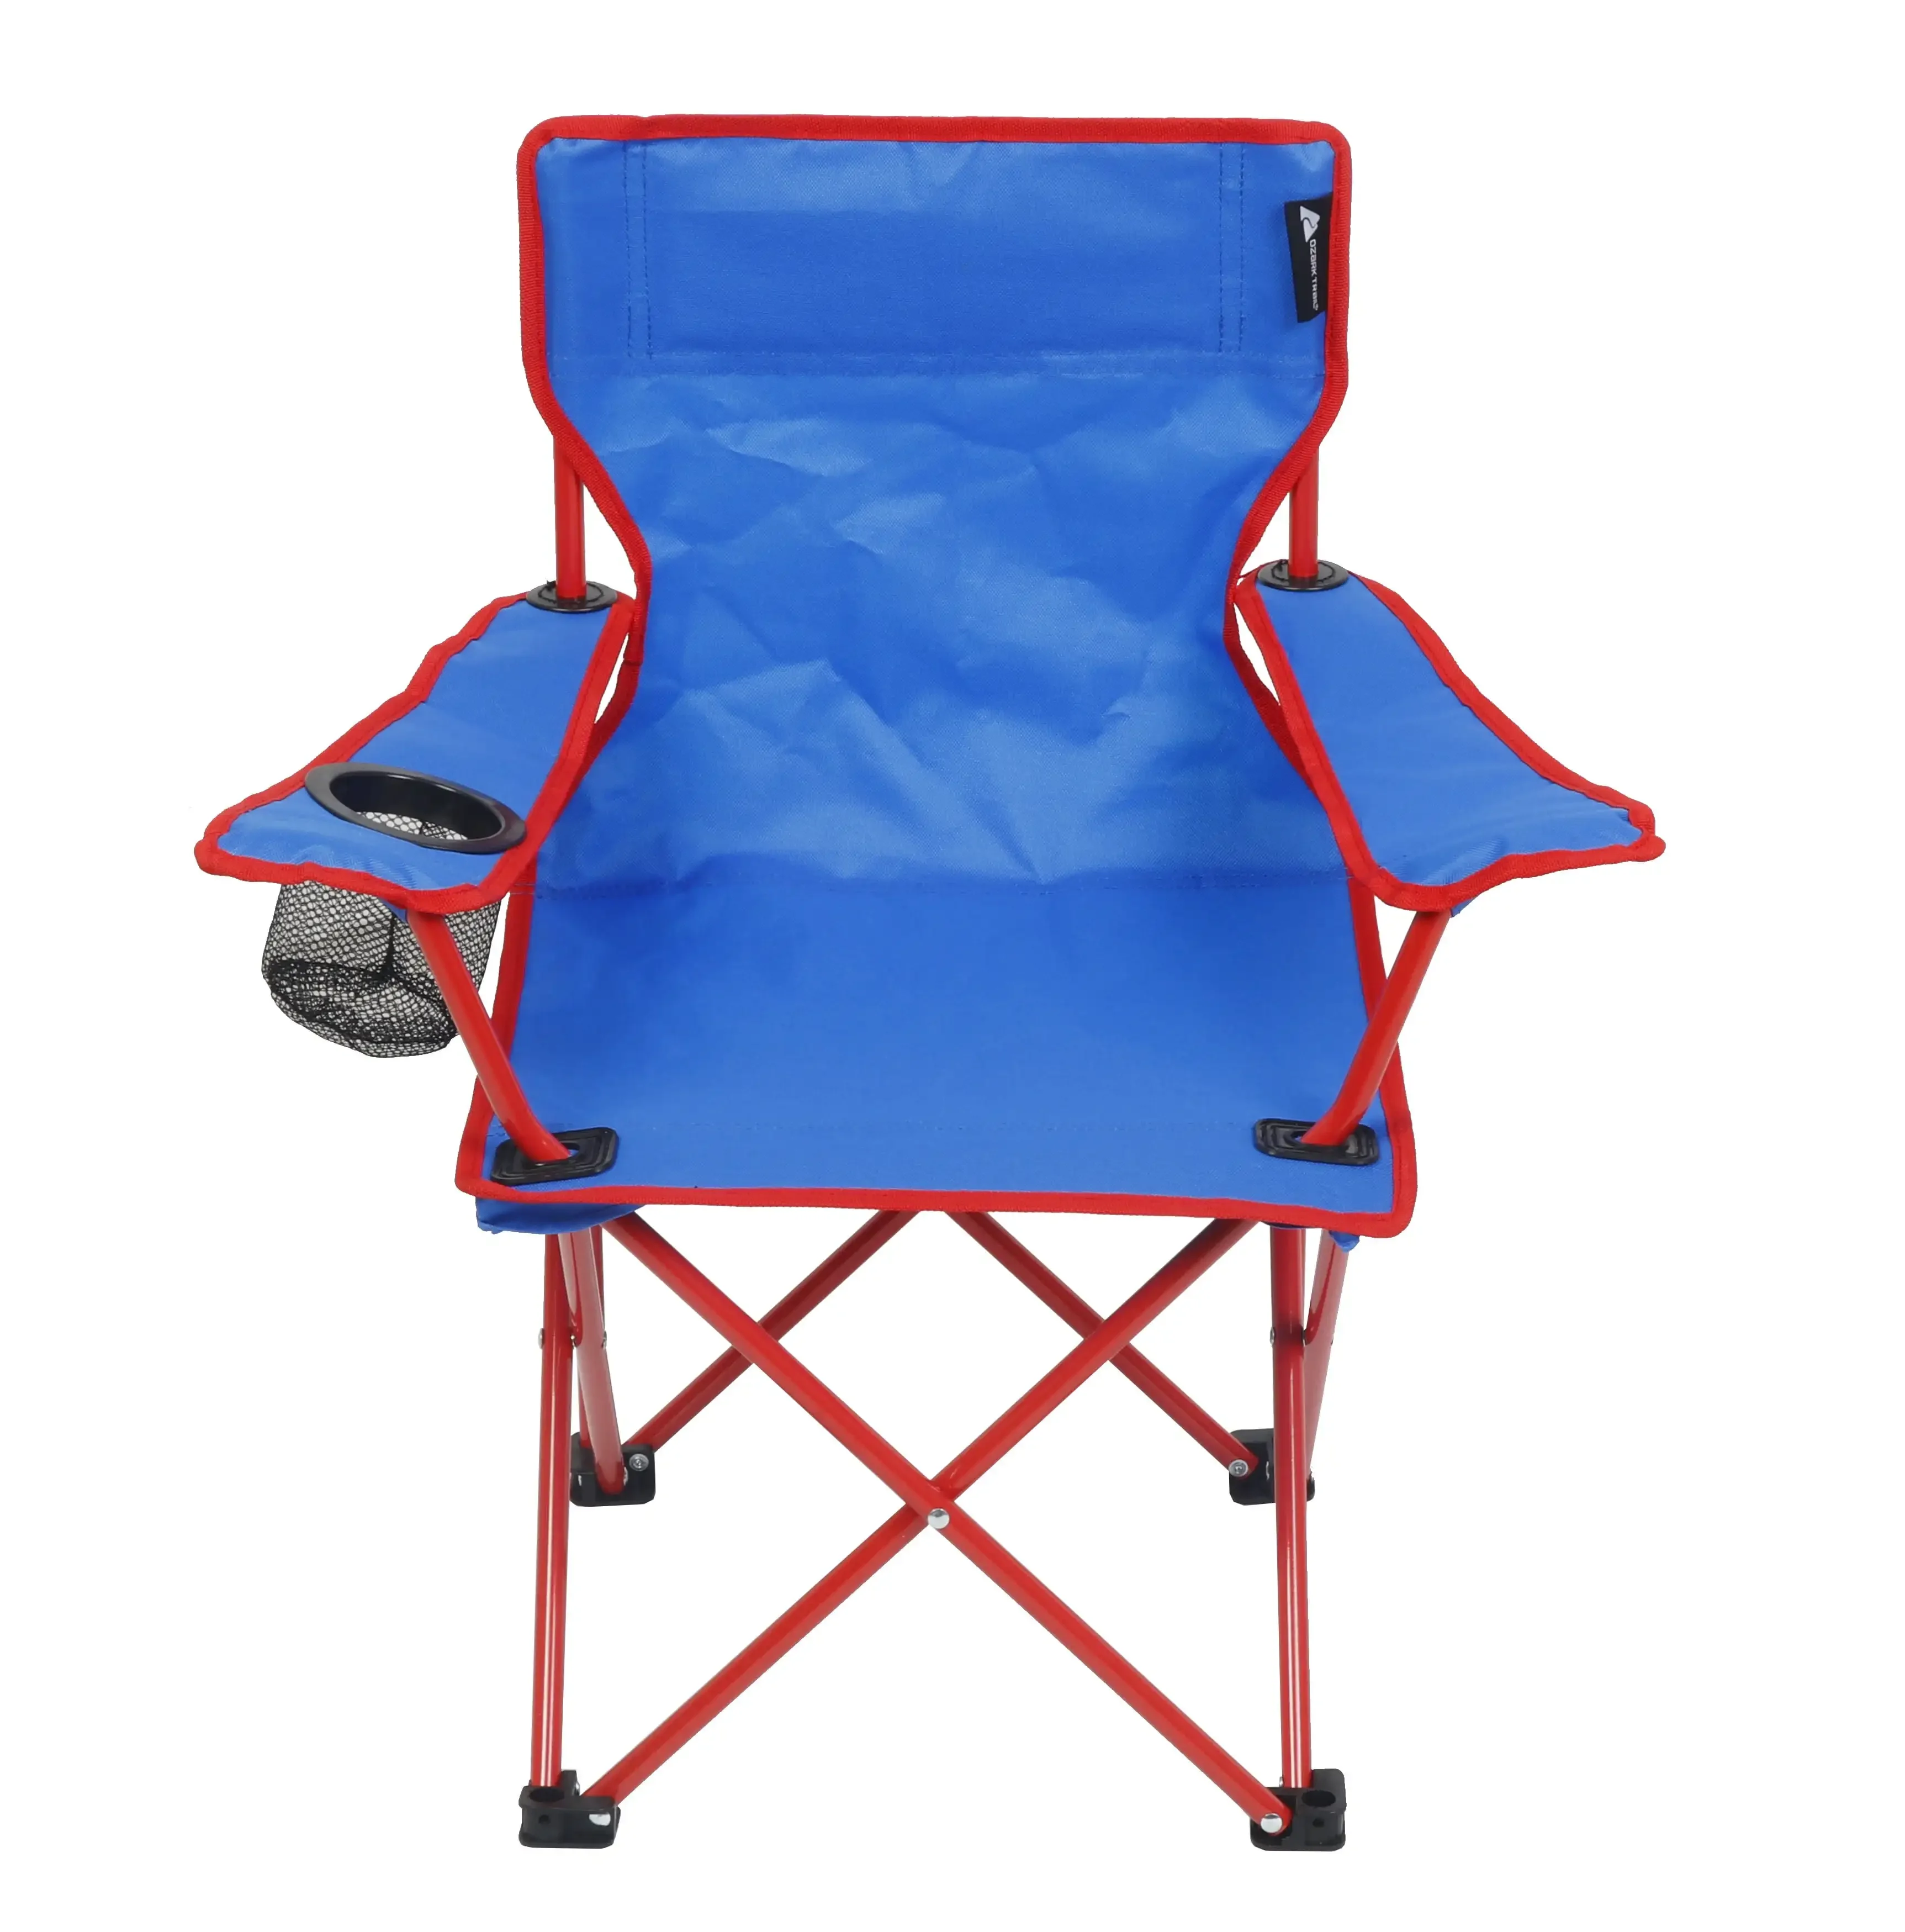 ozark-trail-childs-camp-chair-blue-weight-limits-125-lbs-ages-5-12